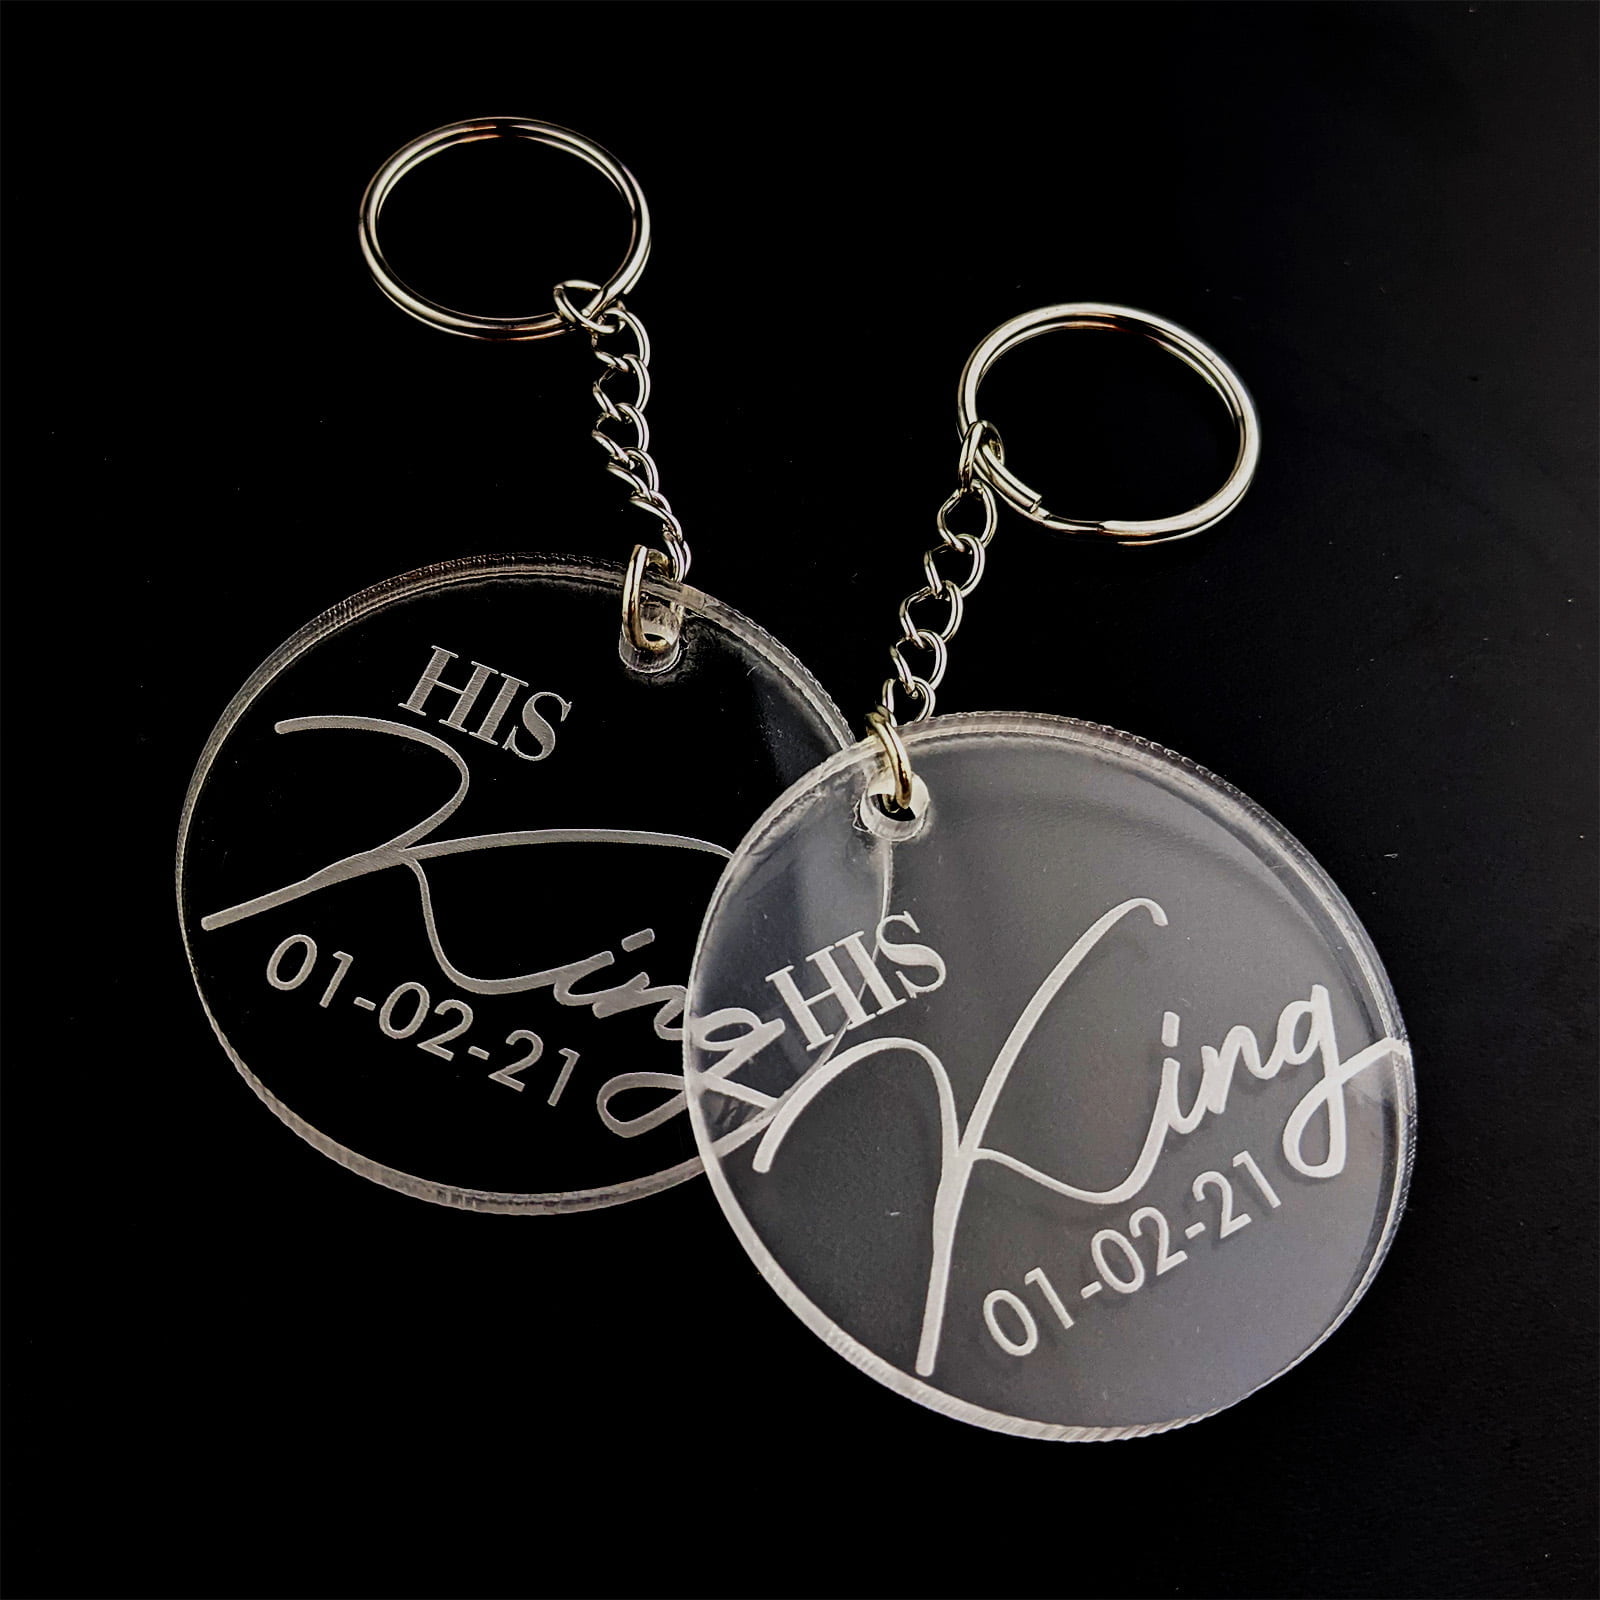 King and queen keychain pair 1